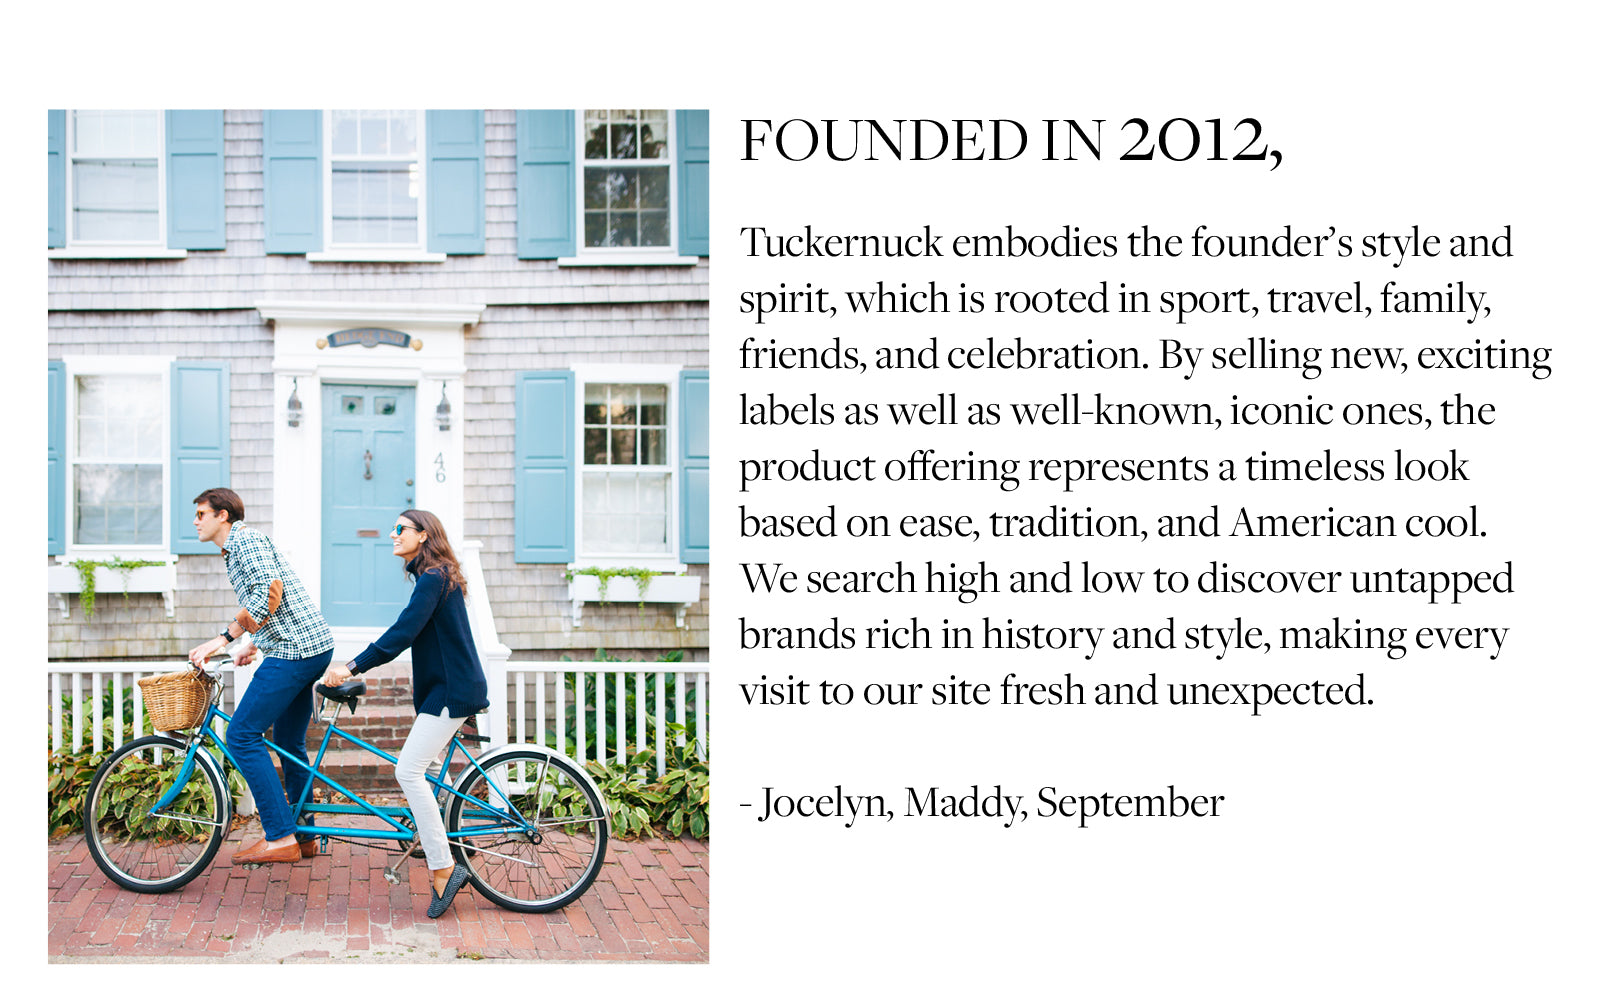 Founded in 2012,   Tuckernuck embodies the founder’s style and spirit, which is rooted in sport, travel, family, friends, and celebration. By selling new, exciting labels as well as well-known, iconic ones, the product offering represents a timeless look based on ease, tradition, and American cool. We search high and low to discover untapped brands rich in history and style, making every visit to our site fresh and unexpected.   - Jocelyn, Maddy, September